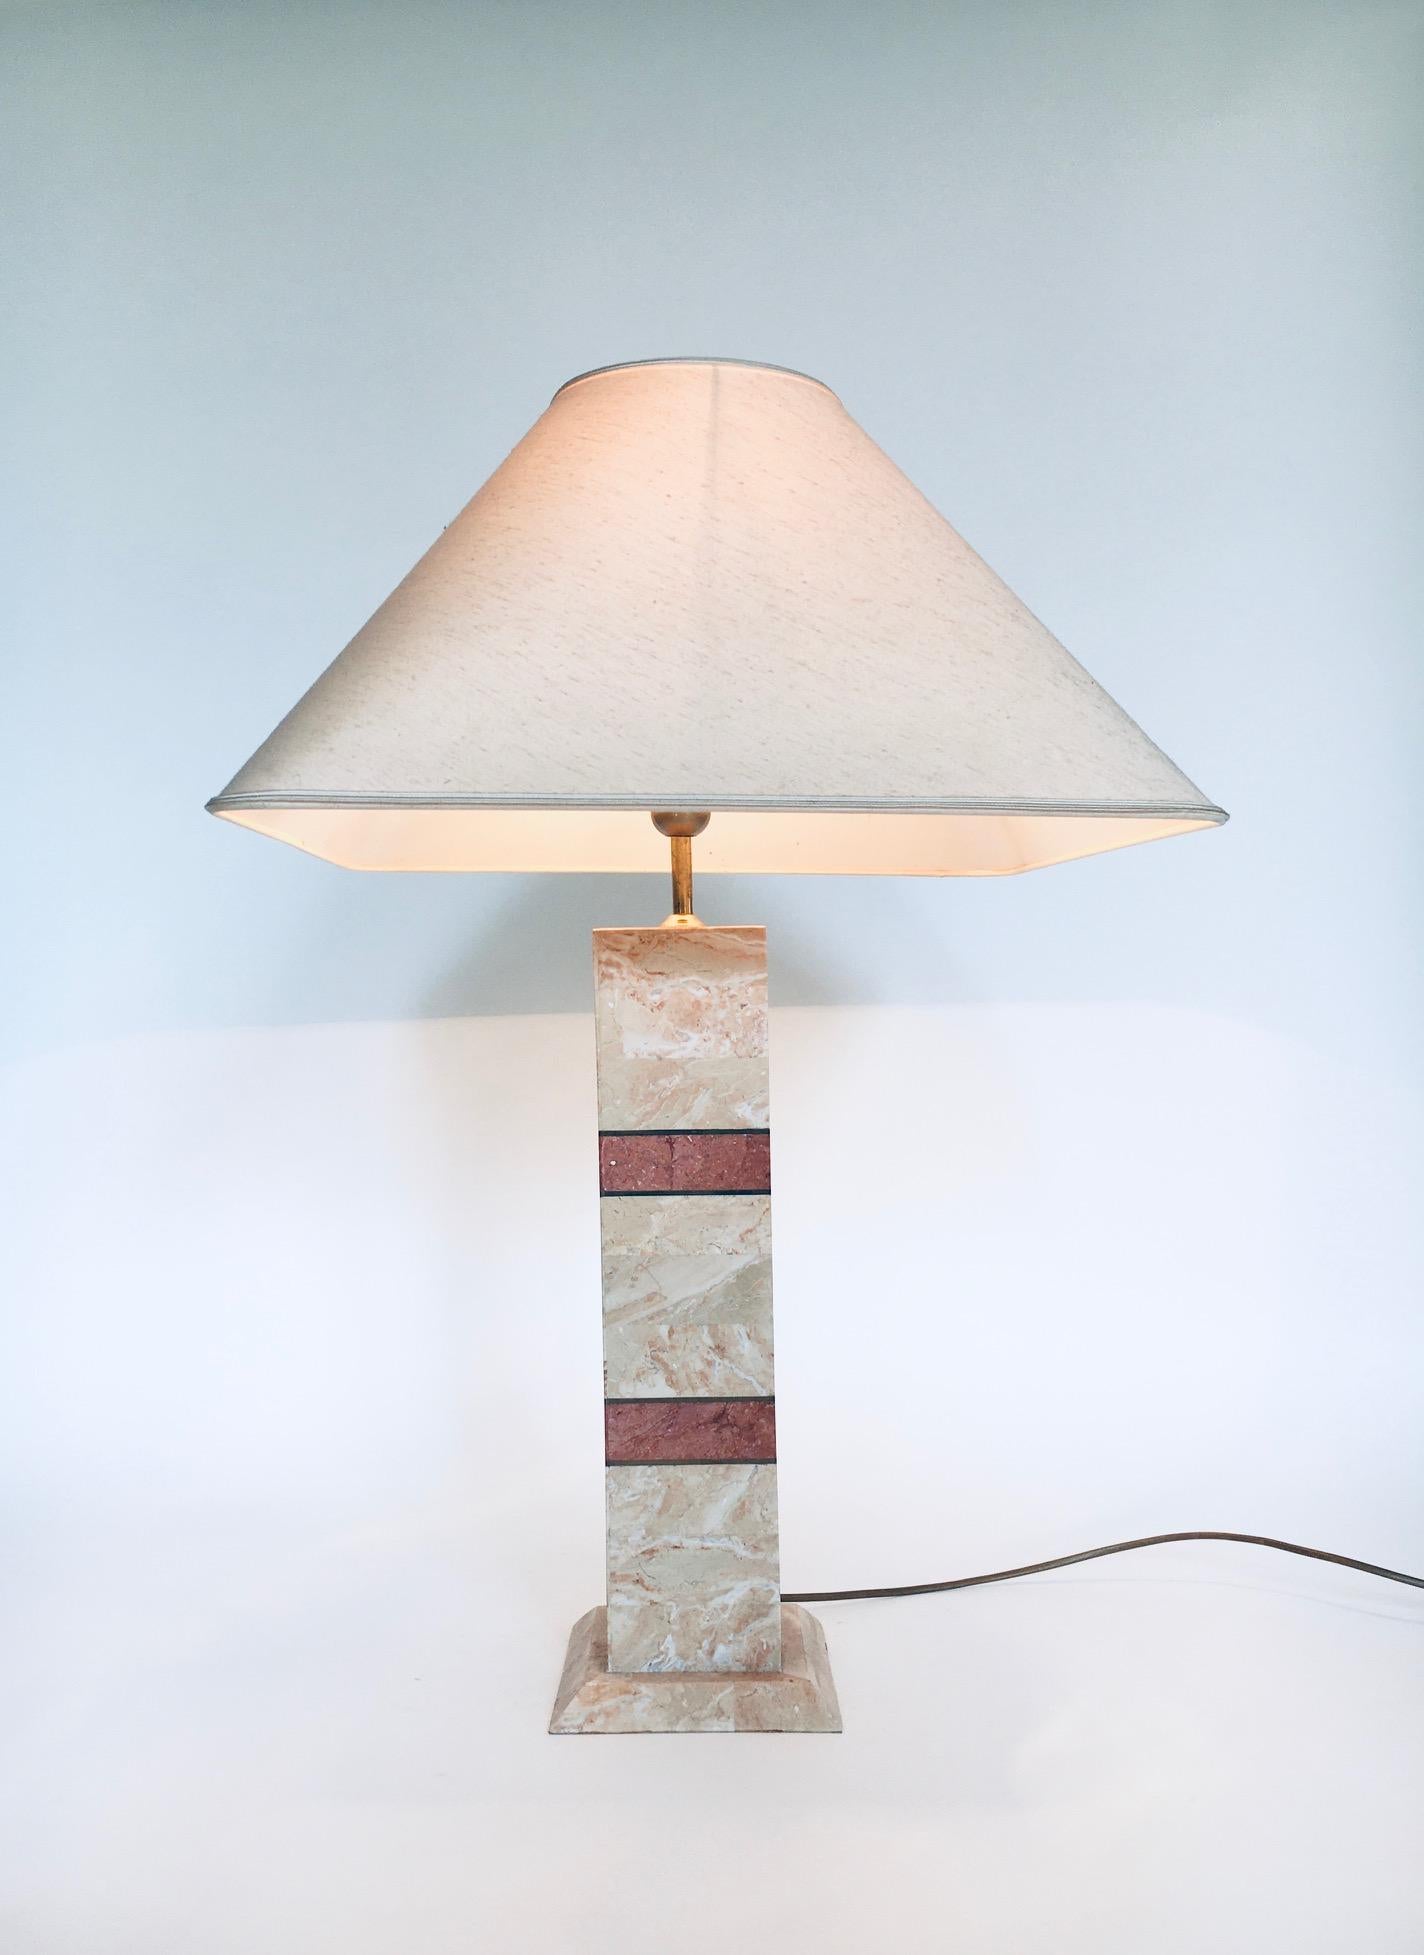 Vintage Postmodern era Hollywood Regency Style Italian Design Pink Marble Table Lamp set, made in Italy 1970's. Majestic table lamp set. Architectural in design. 2 Color marble base with brass trim and rounded square original lamp shade on both